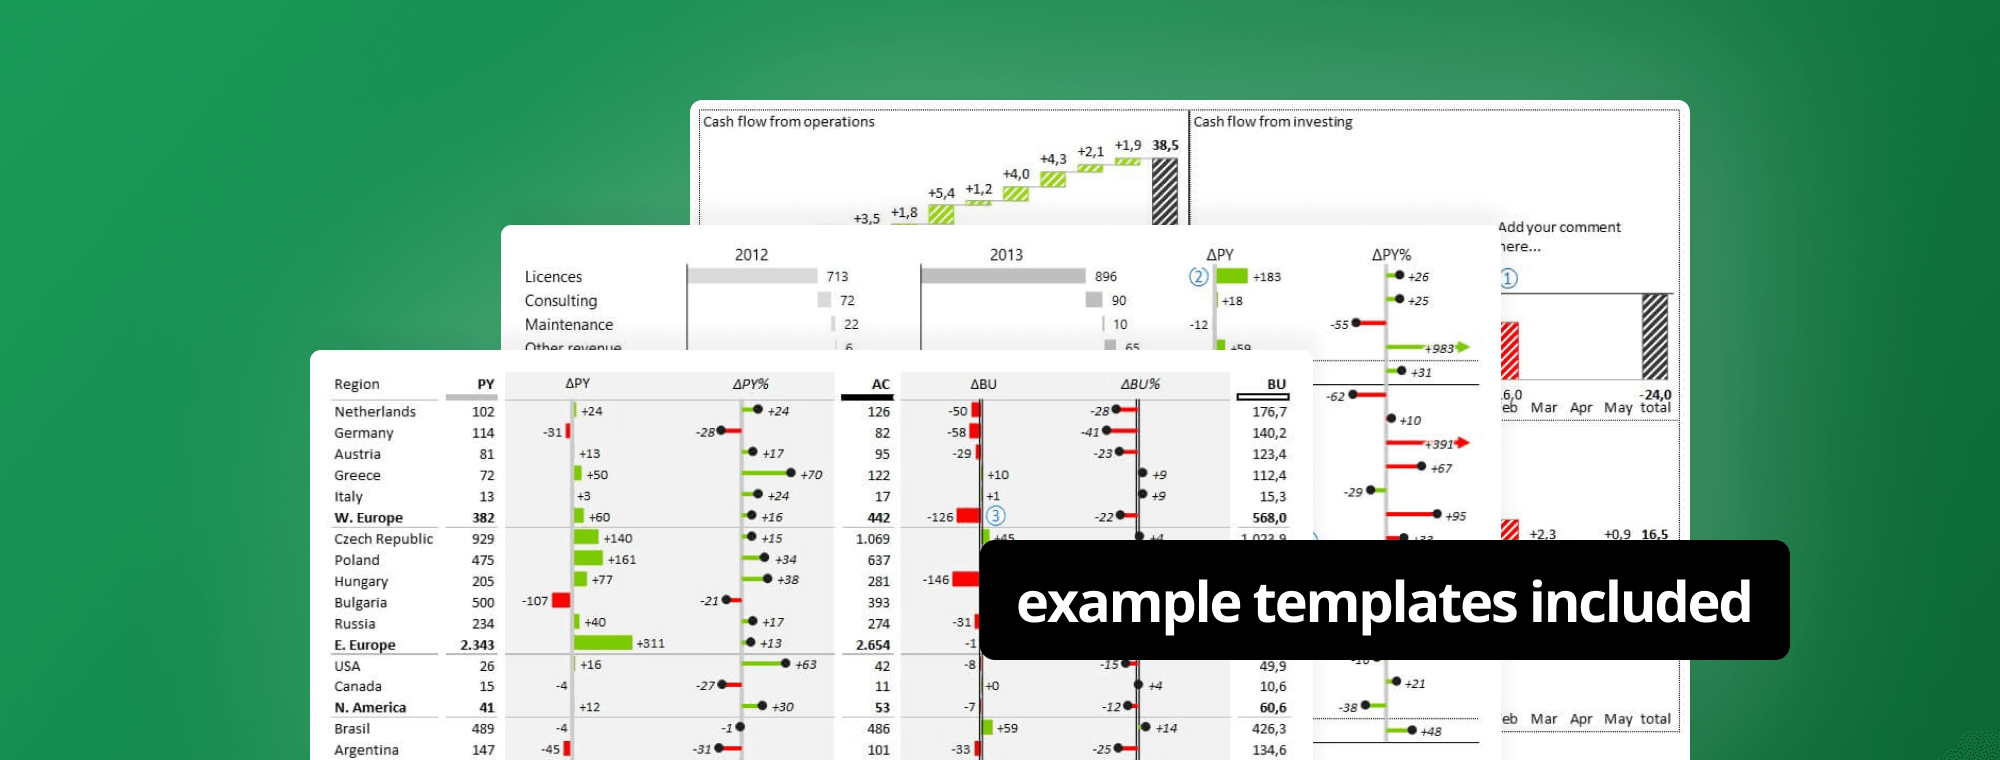 Excel Report Templates: The 21 Essential Templates You